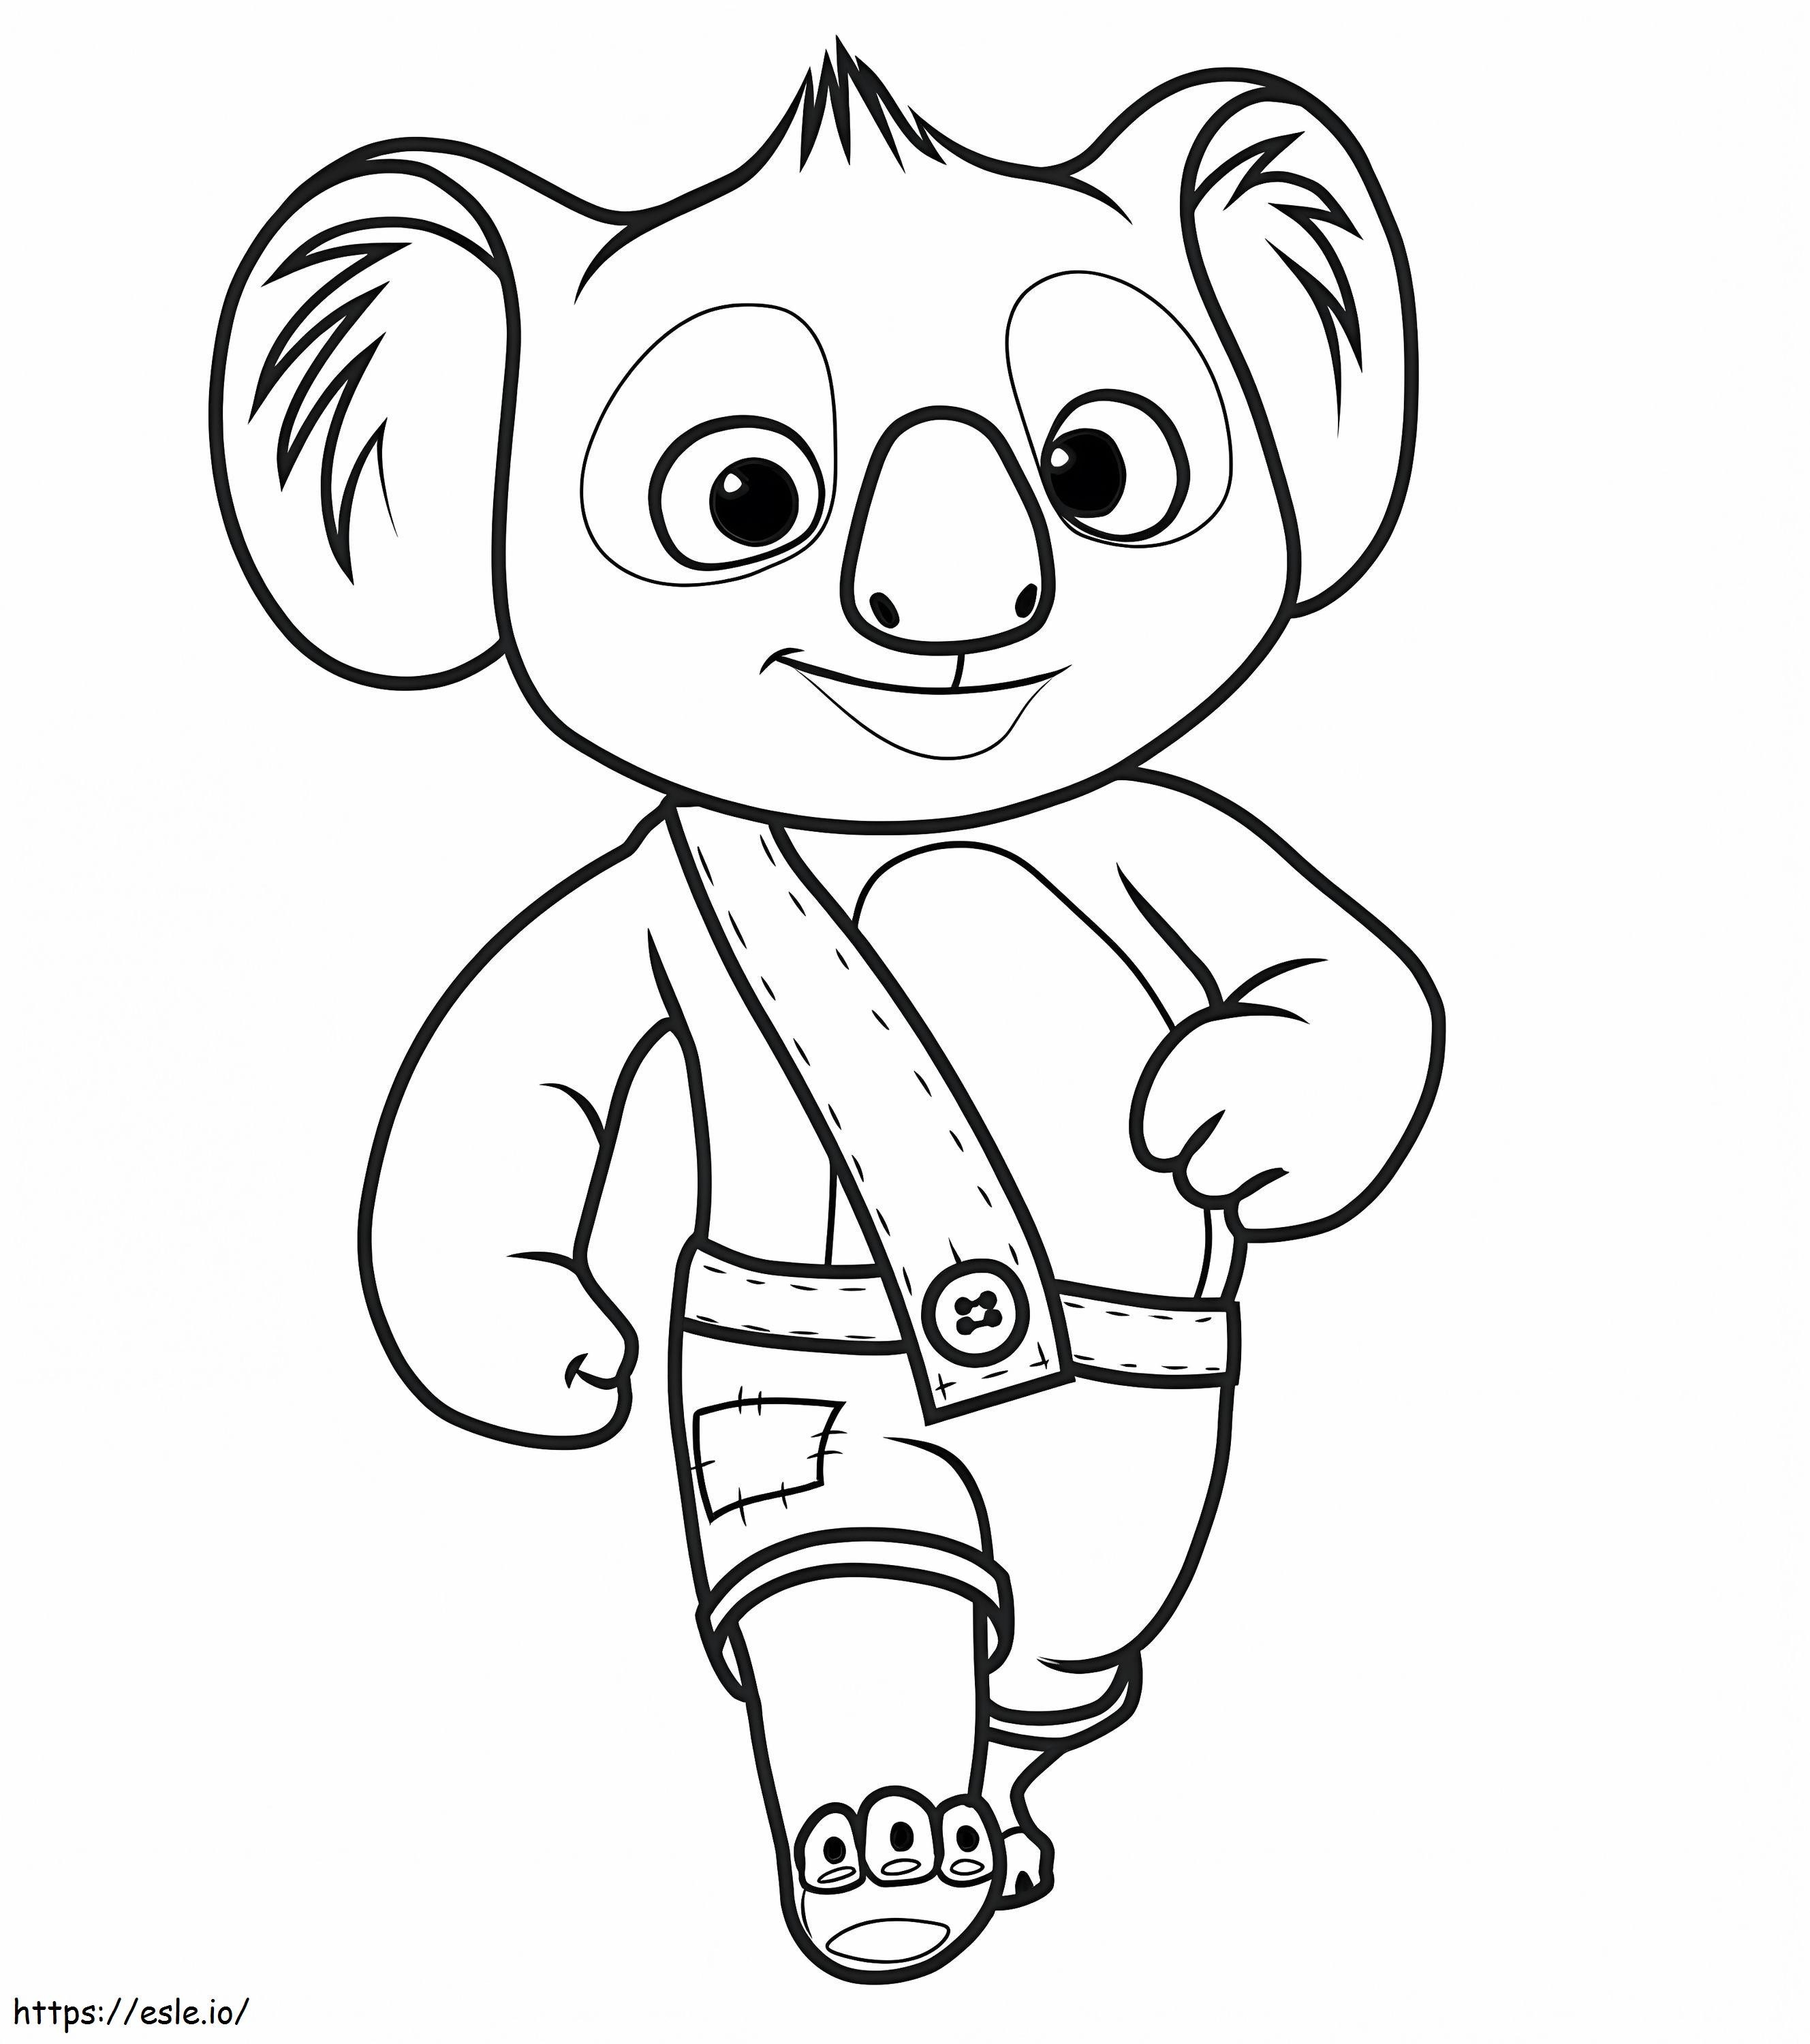 Blinky Bill 2 coloring page